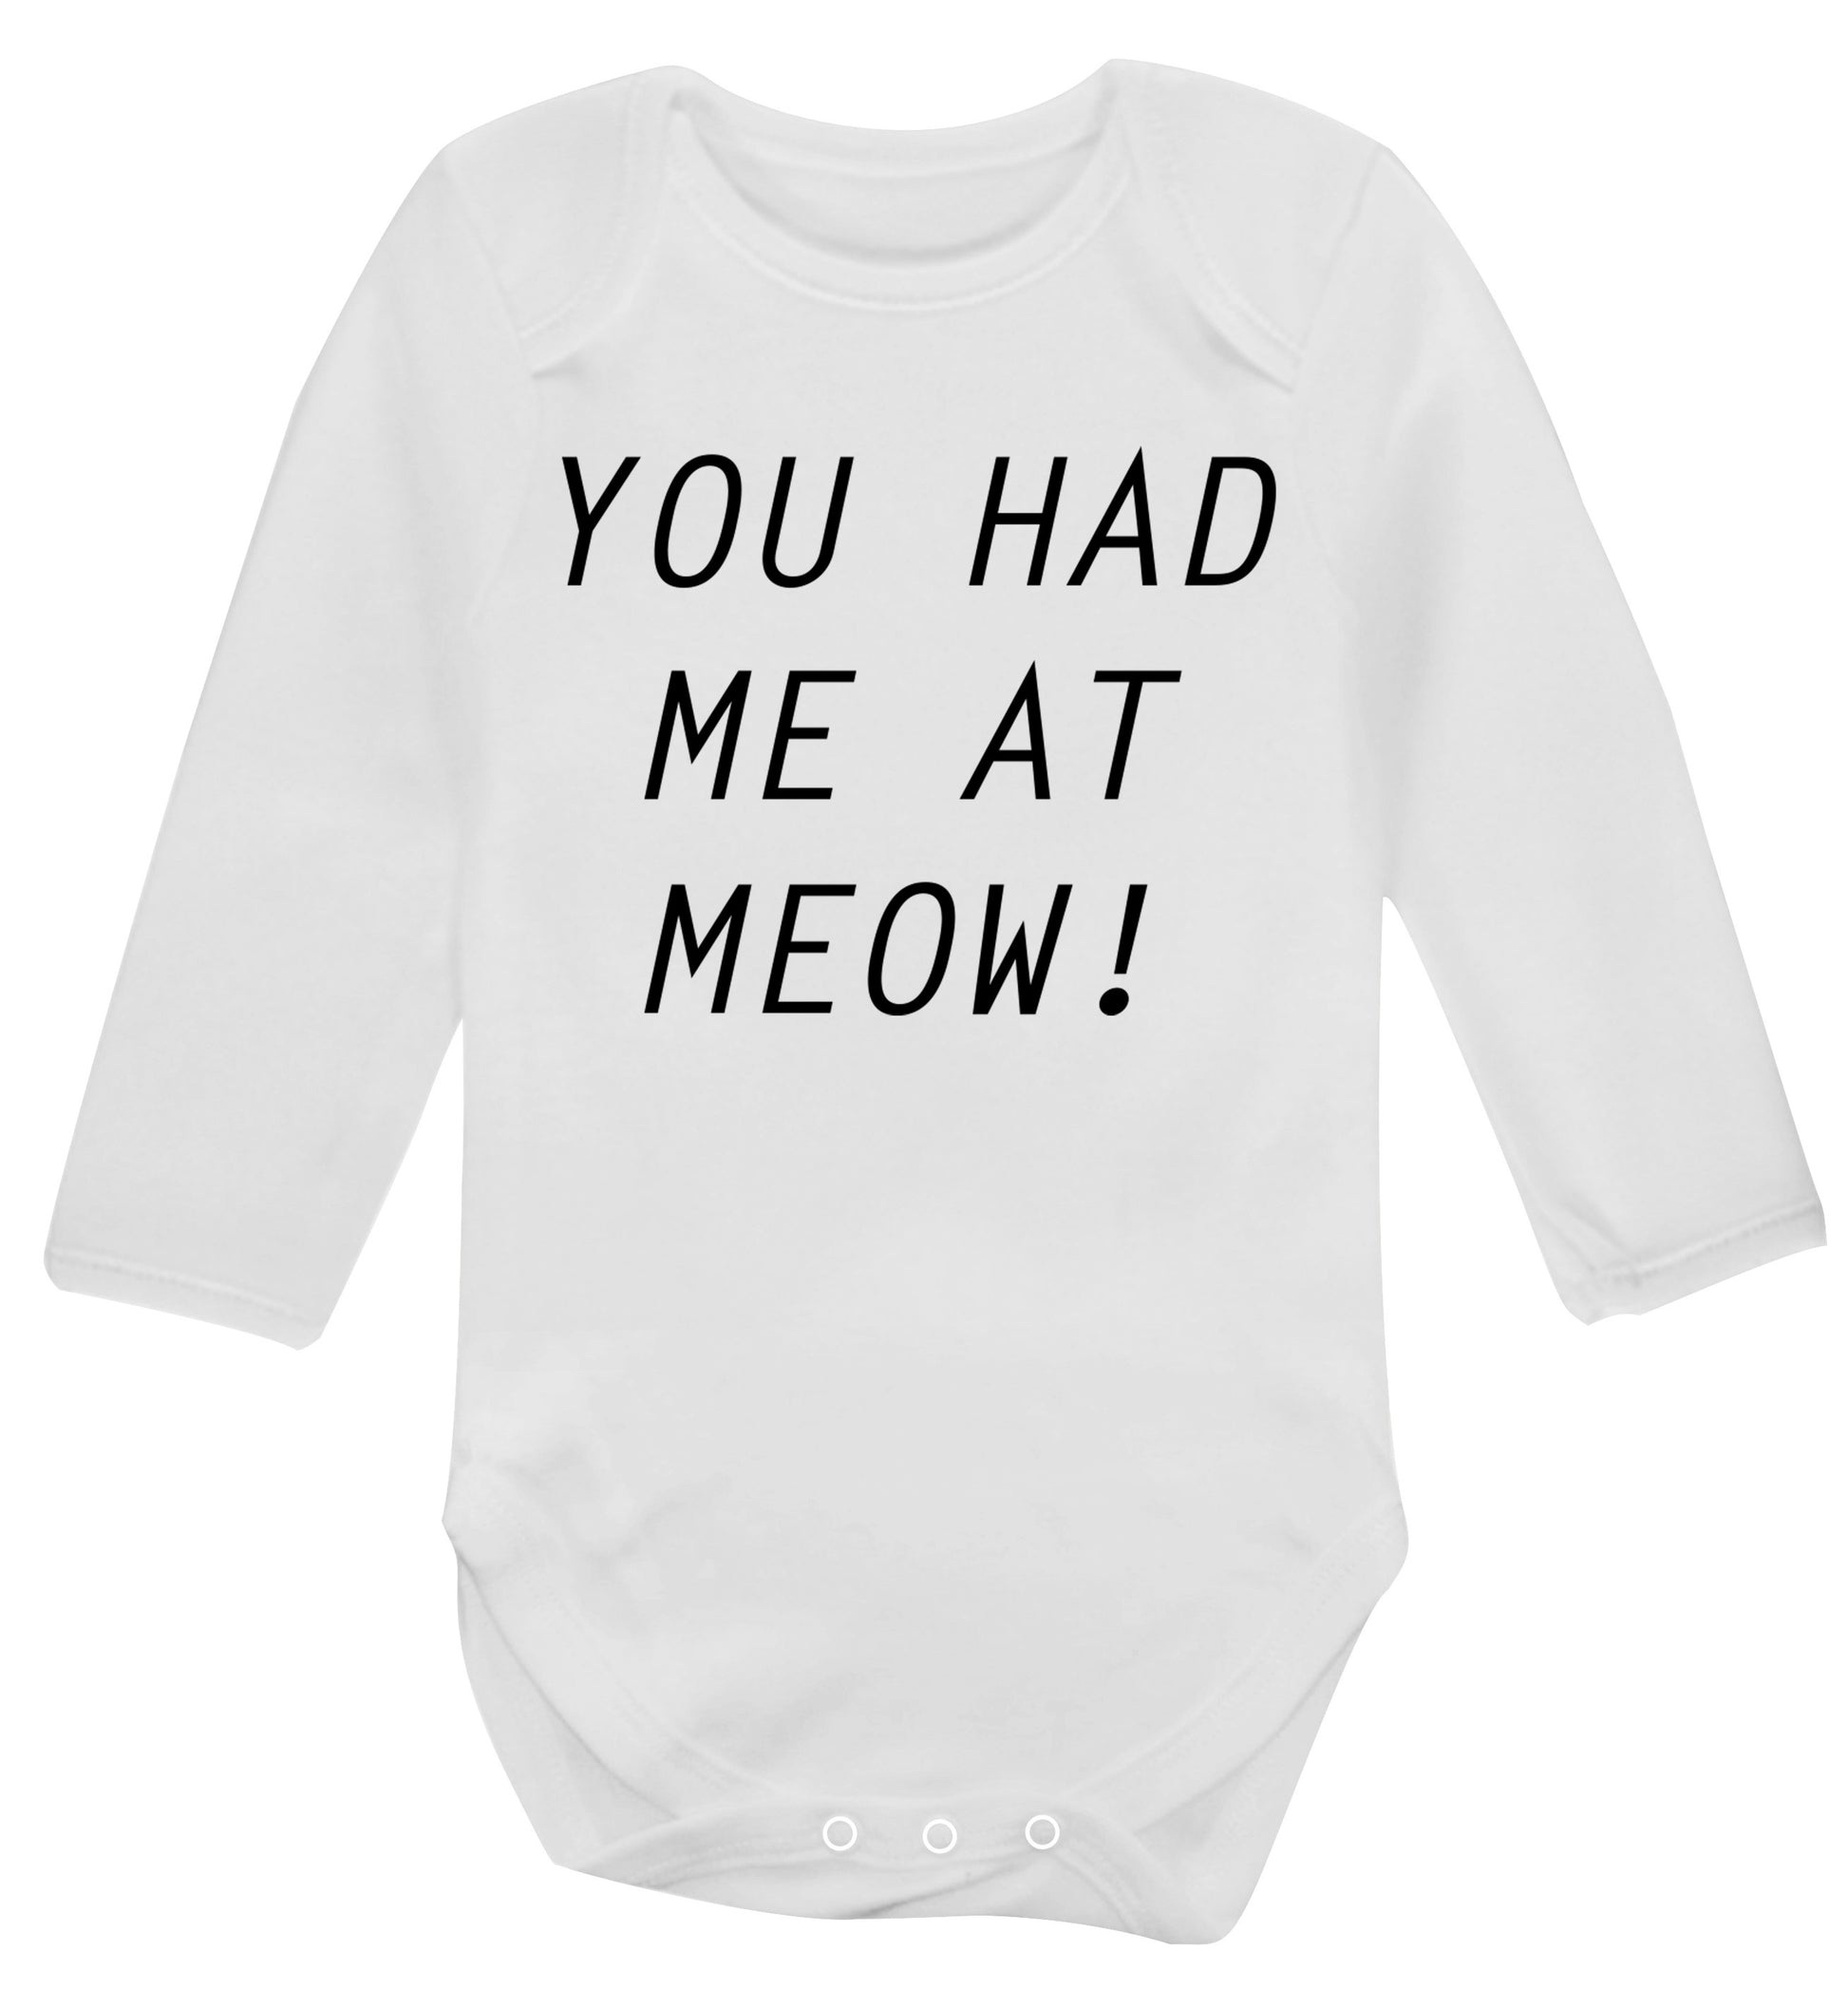 You had me at meow Baby Vest long sleeved white 6-12 months